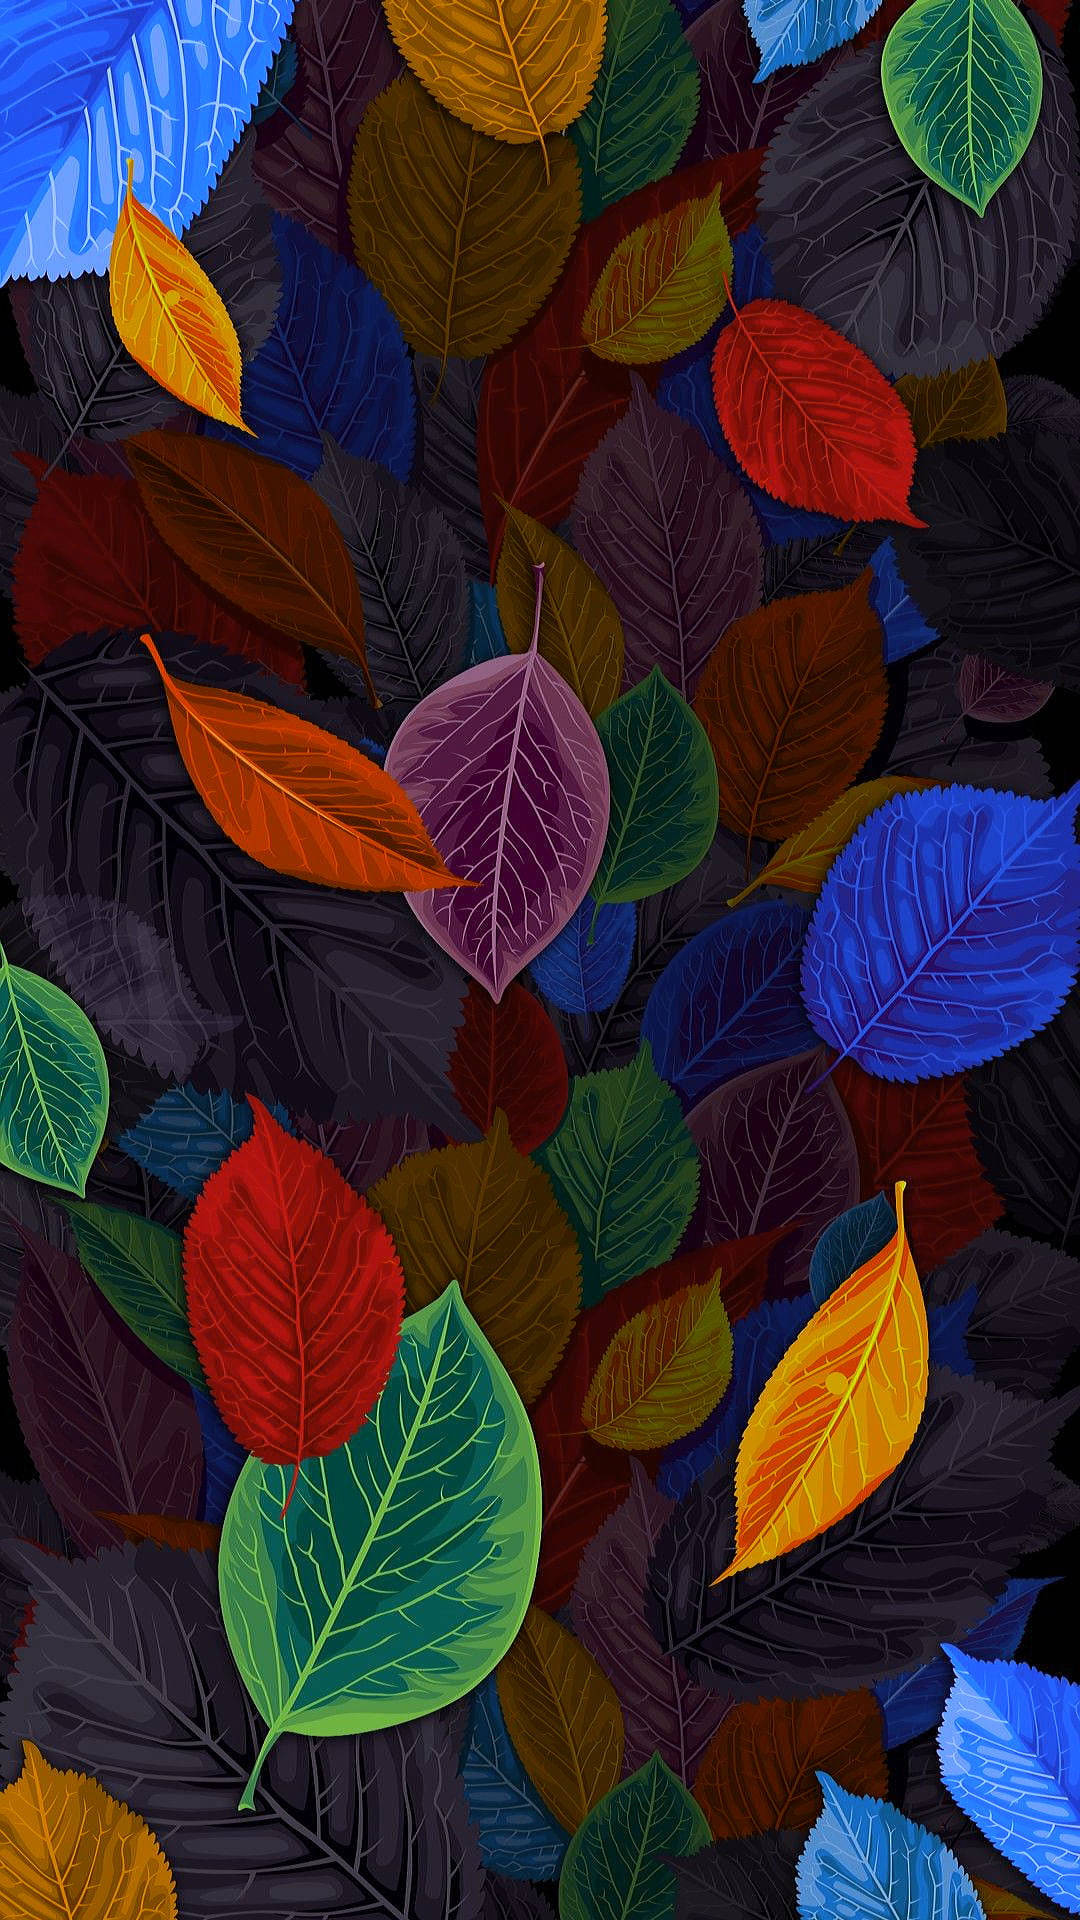 8k Iphone Falling Multicolored Leaves